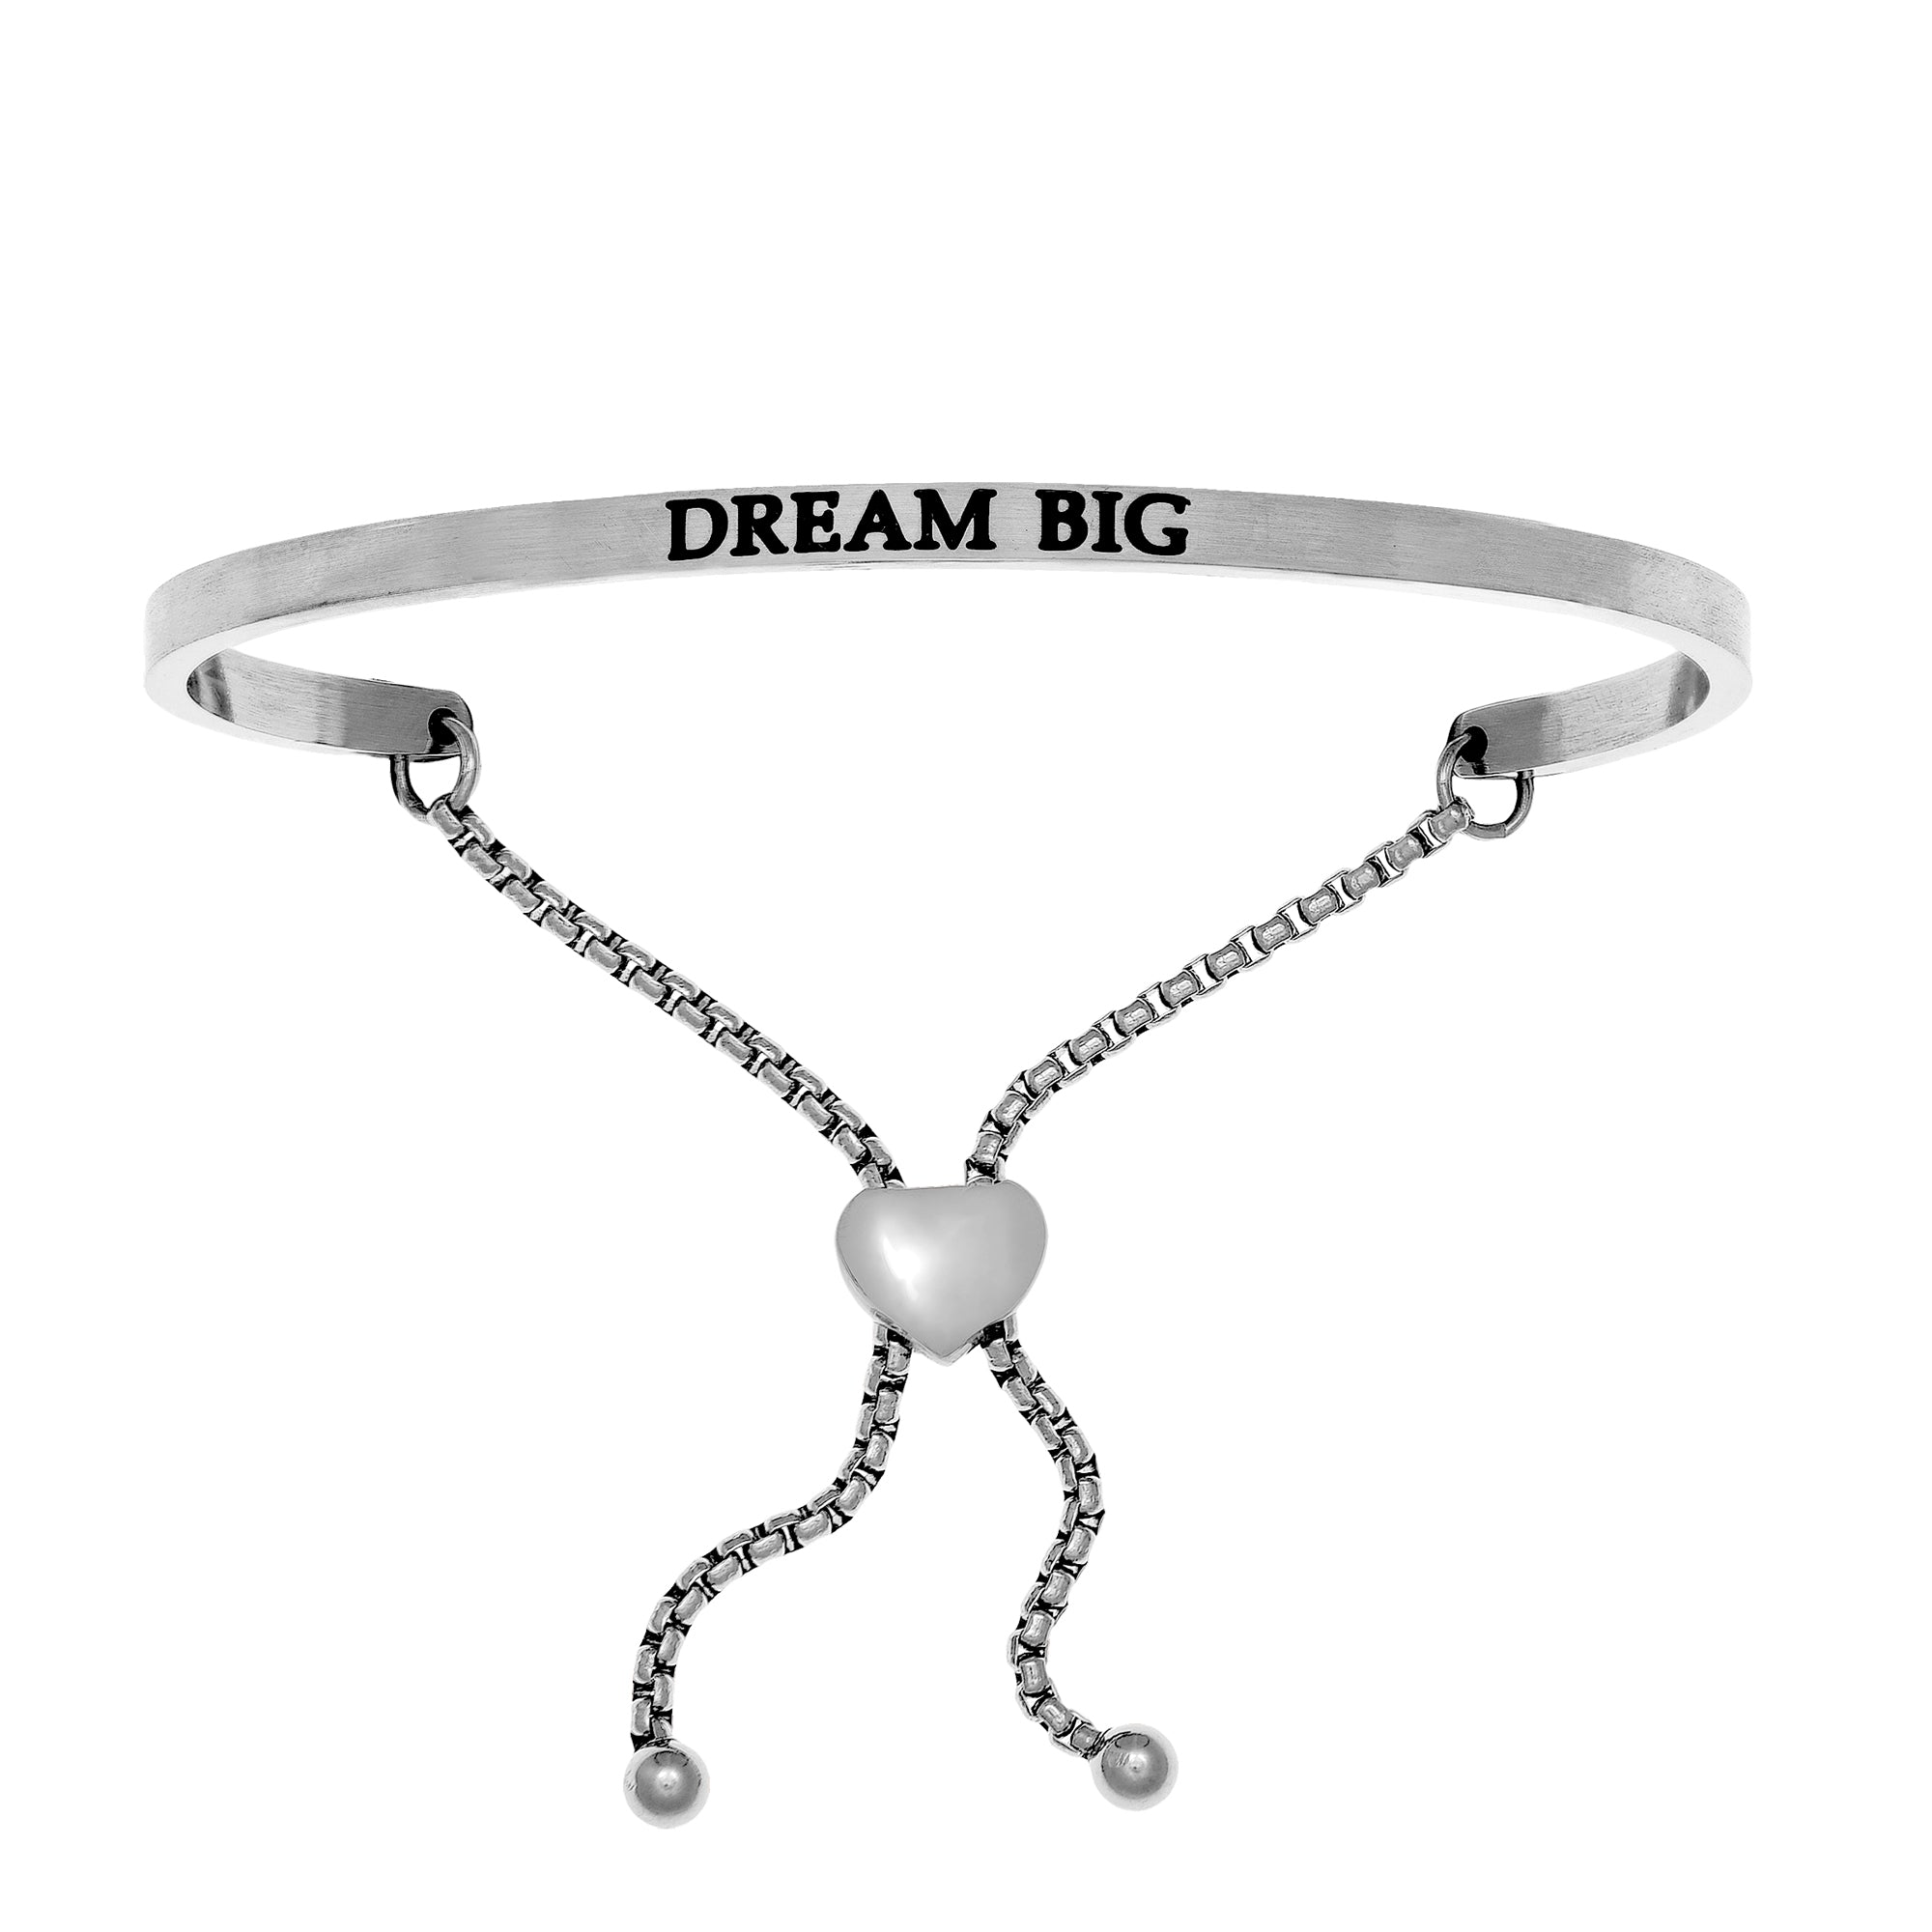 Intuitions Stainless Steel DREAM BIG Diamond Accent Adjustable Bracelet fine designer jewelry for men and women